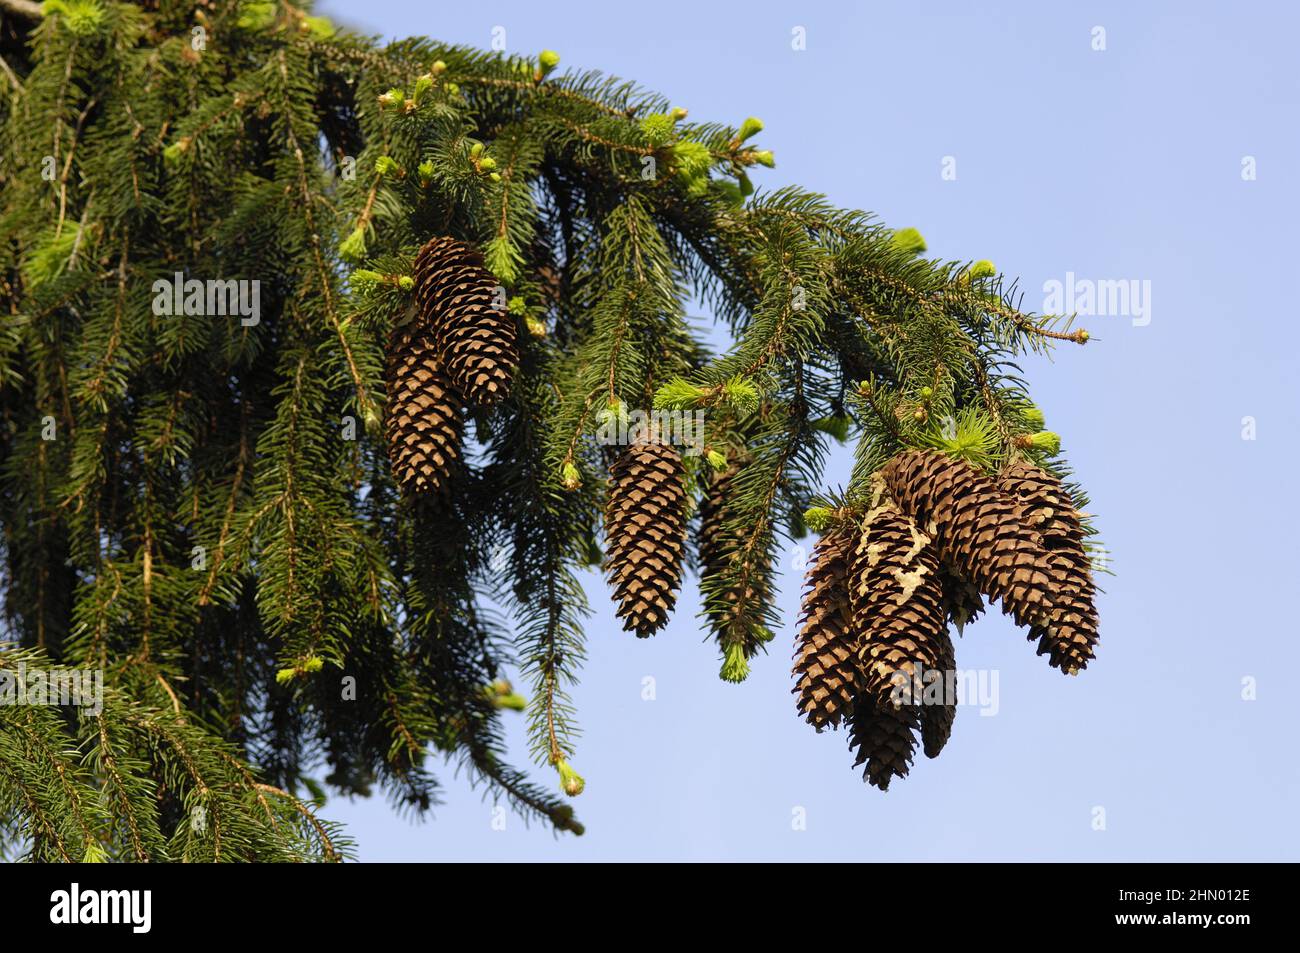 Norway spruce - European spruce (Picea abies) cones hanging on a branch Stock Photo